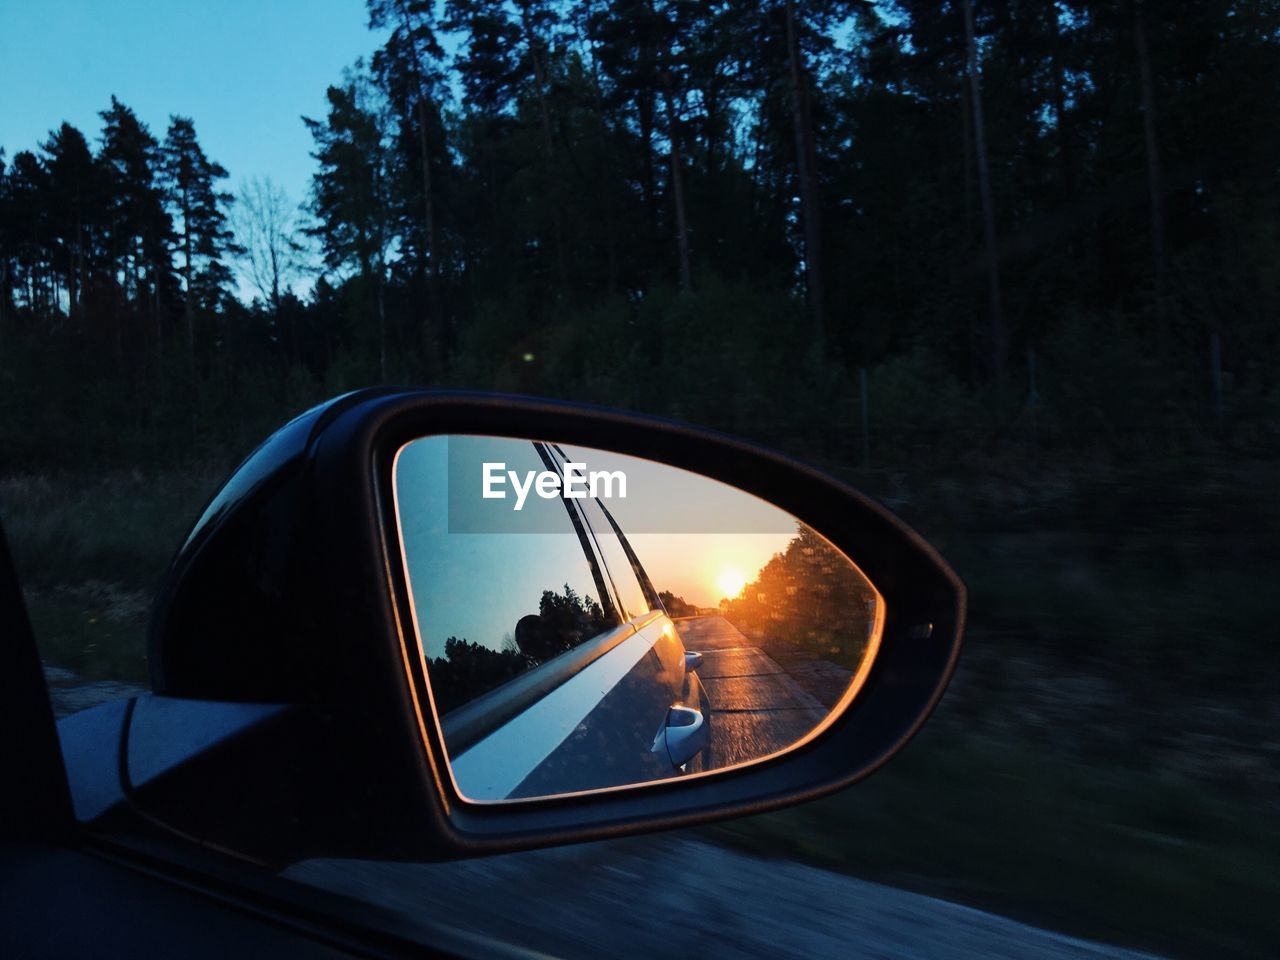 Sun reflecting on car side-view mirror during sunset